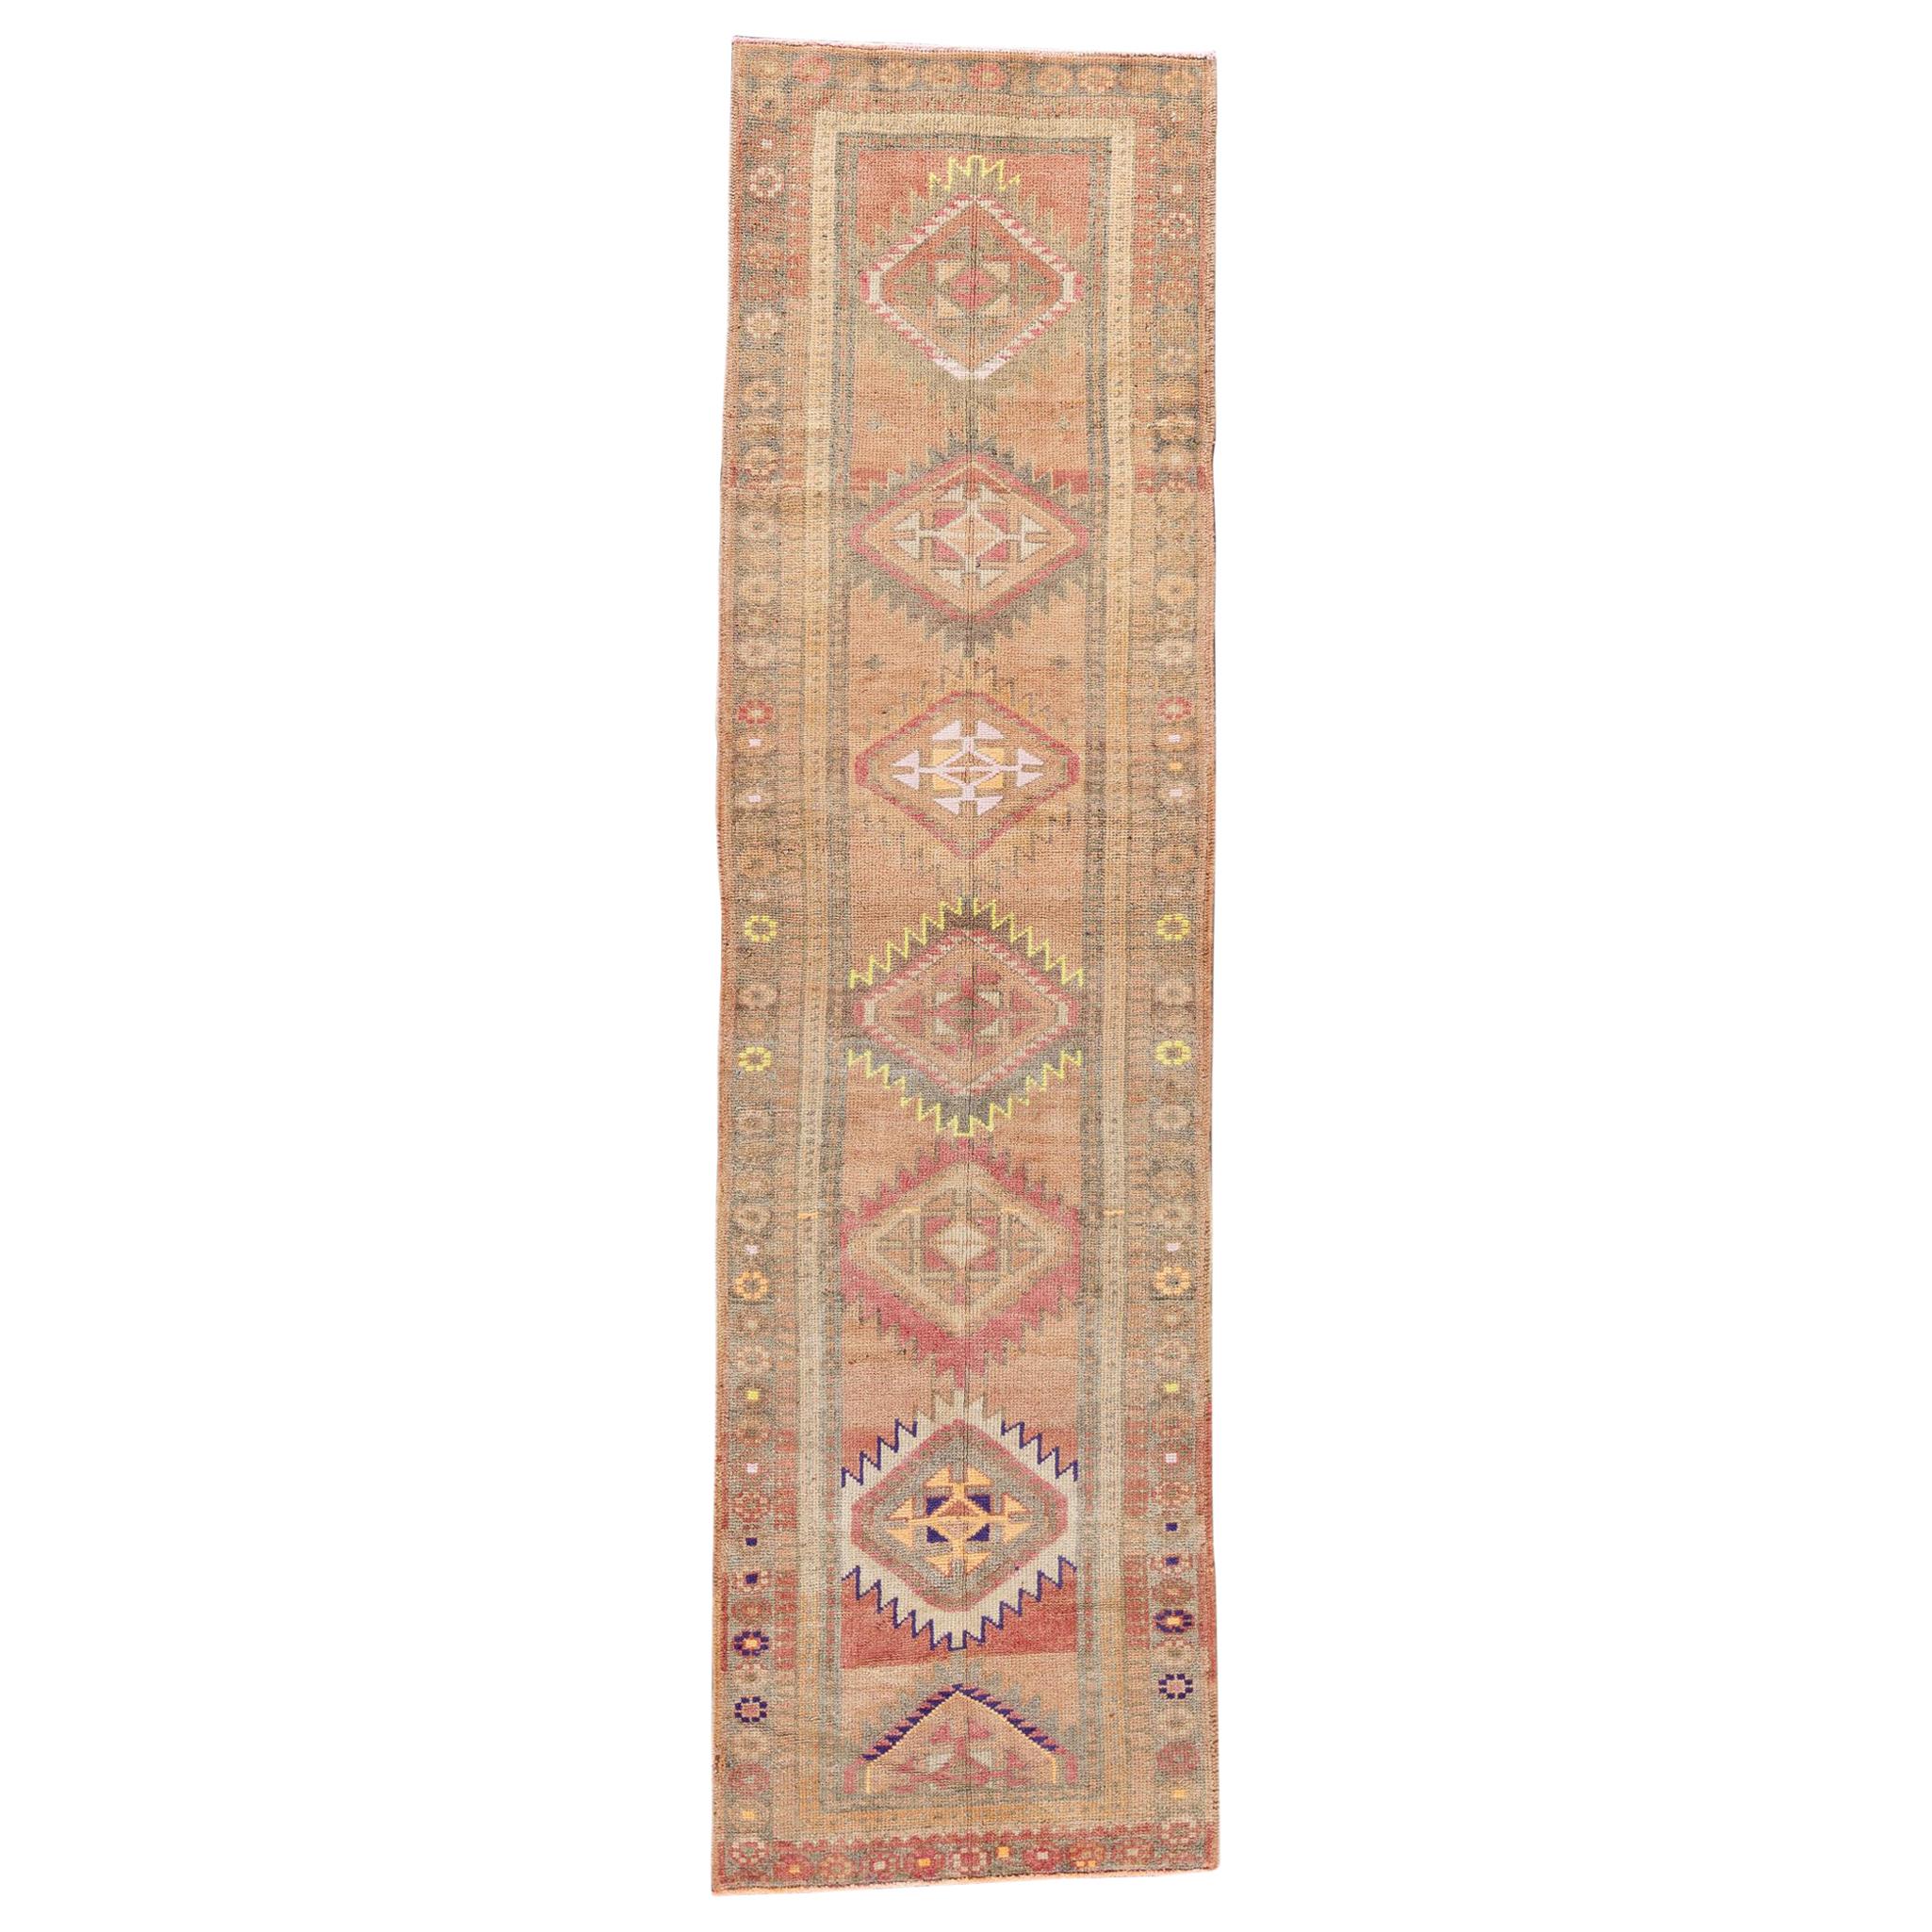 Early 20th Century Anatolian Village Runner Rug For Sale